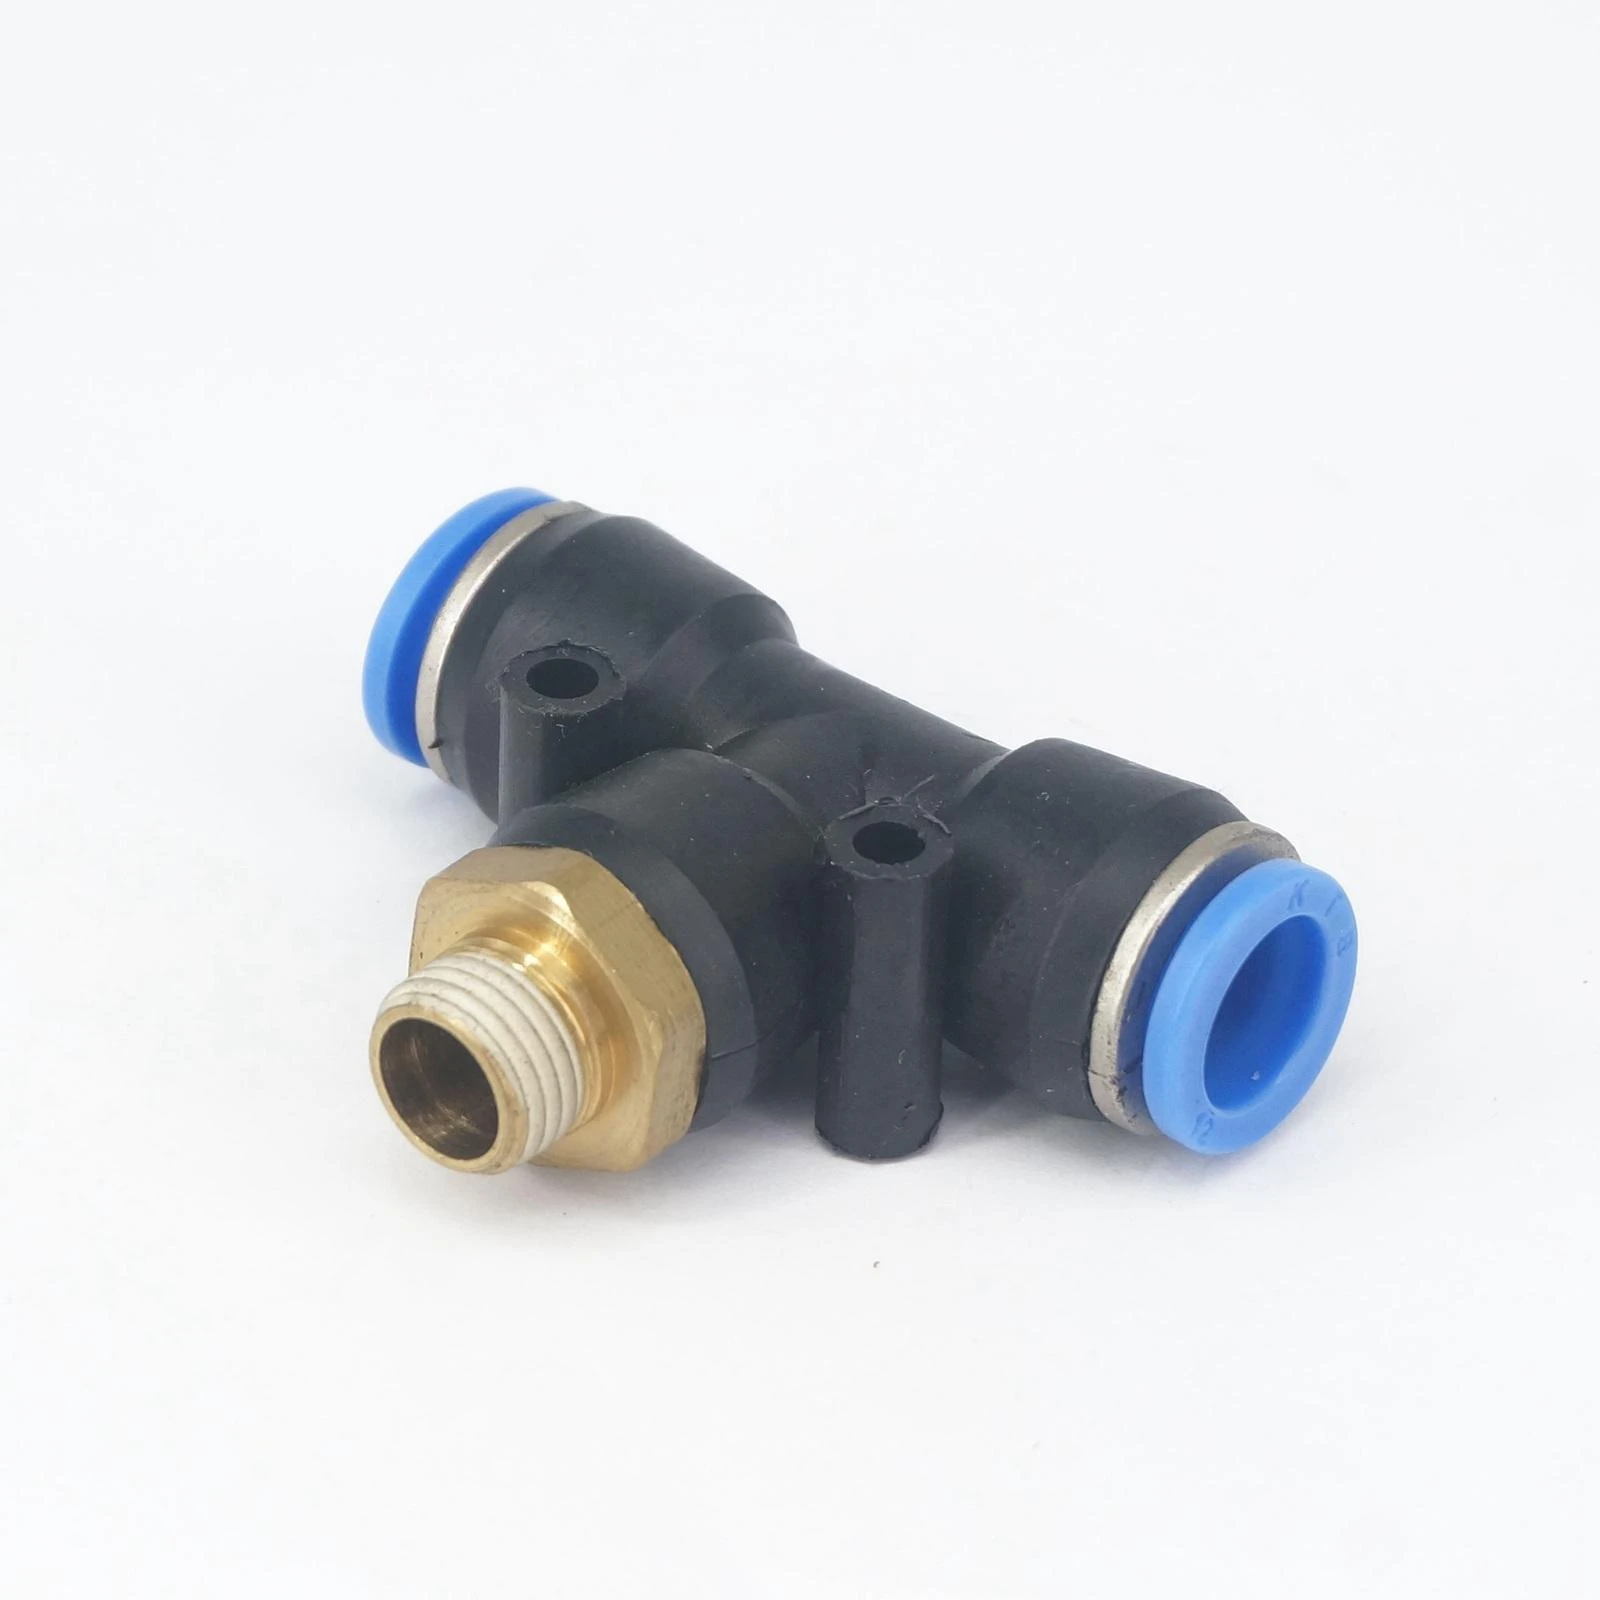 5PCS Tube OD 12mm-1/4" BSP Male Pneumatic Connector Push In To Connect Fitting 